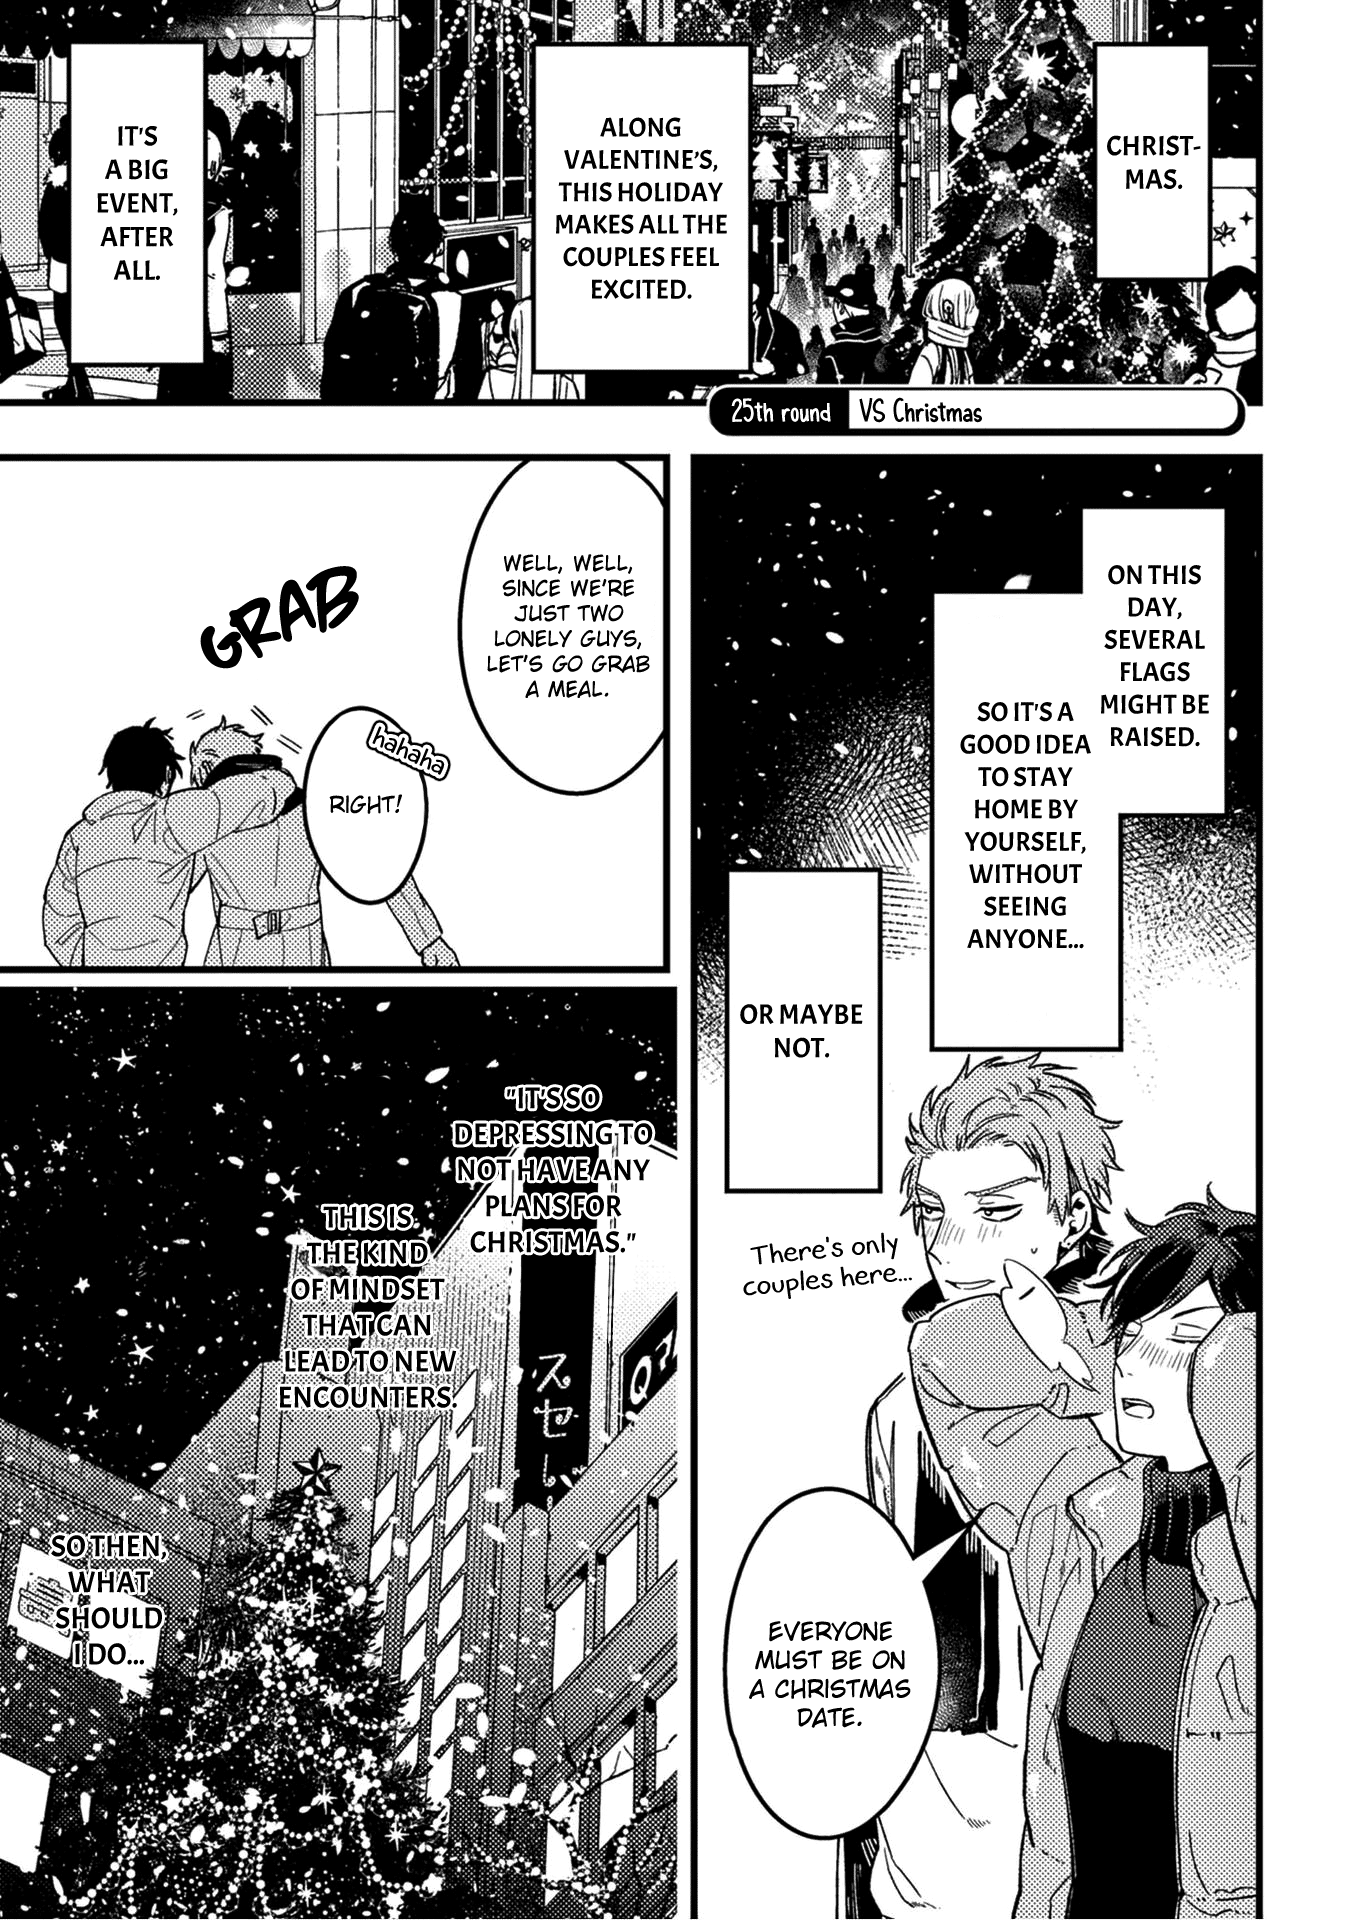 A World Where Everything Definitely Becomes Bl Vs. The Man Who Definitely Doesn't Want To Be In A Bl Vol.2 Chapter 25: Vs Christmas - Picture 2